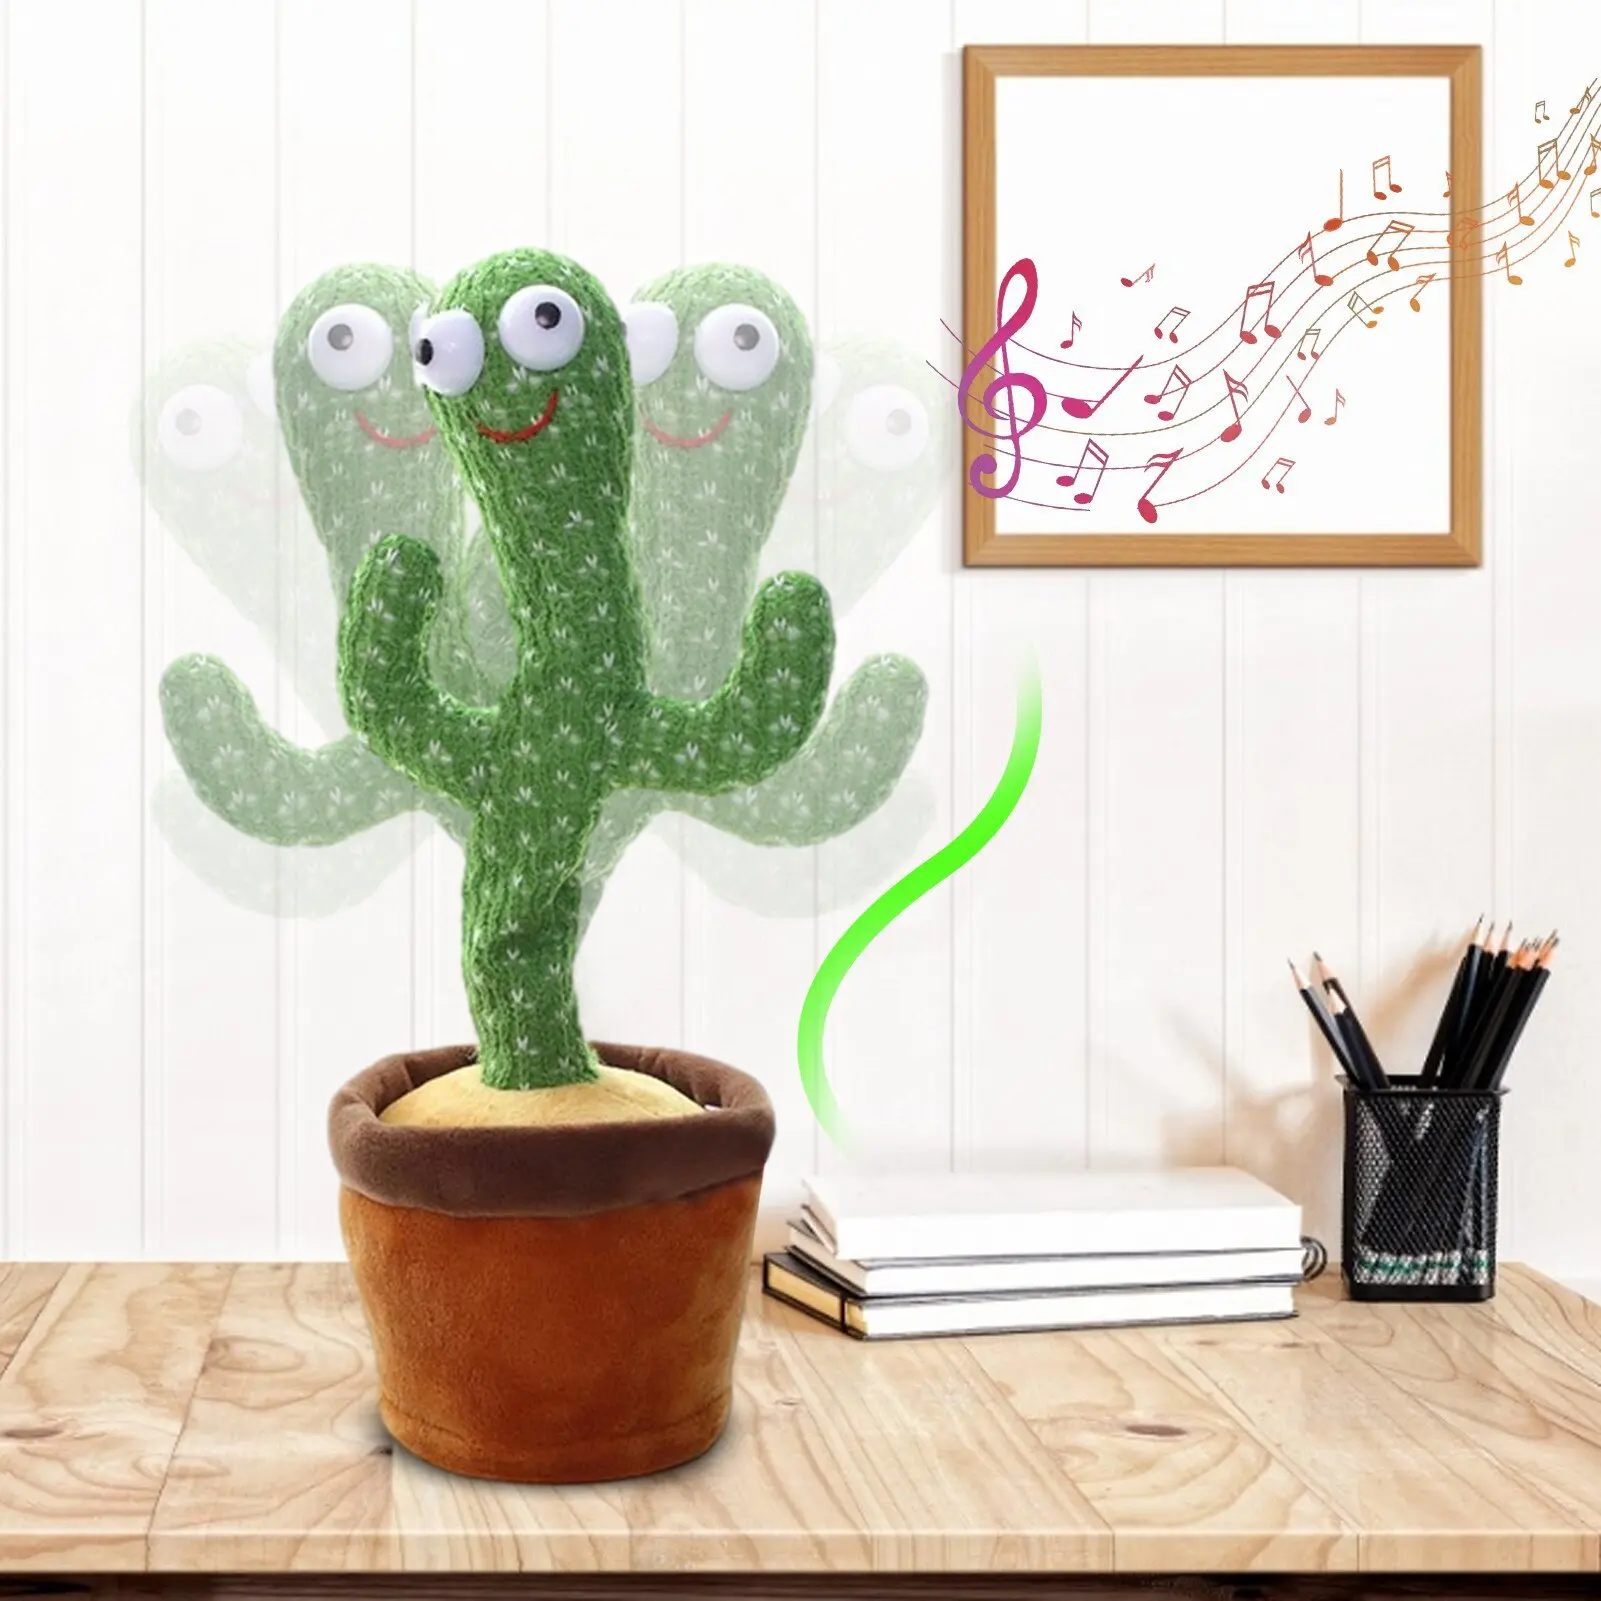 

Dancing Cactus Toy Electronic Shake Dancing Toy With The Dong Plush Cute Dancing Cactus Early Childhood Education Toy